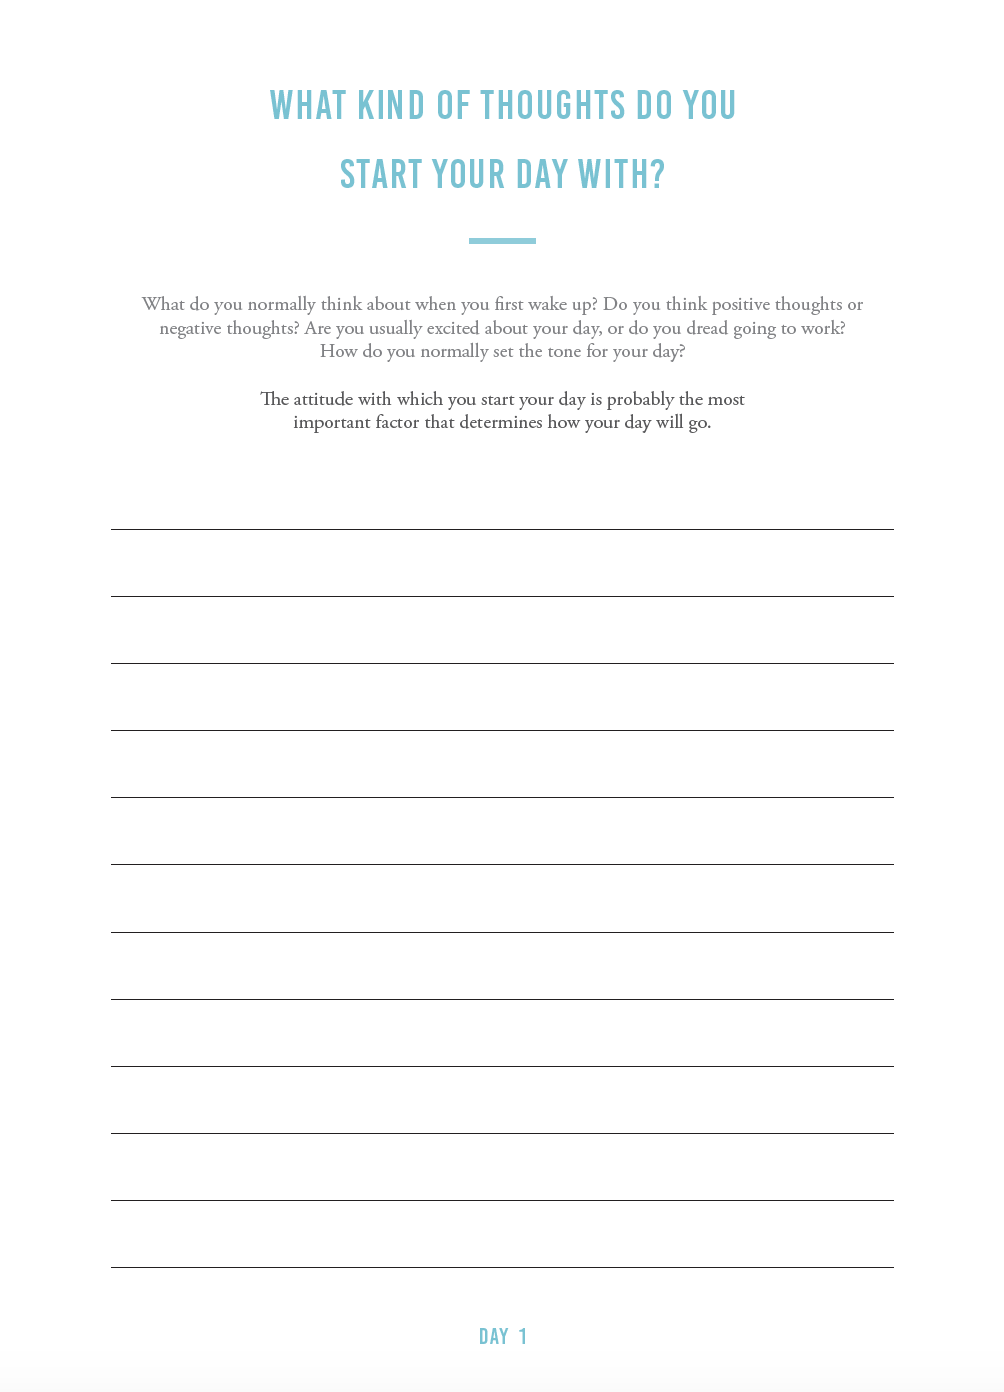 Mindfulness Journal (digital) - The Happiness Planner®